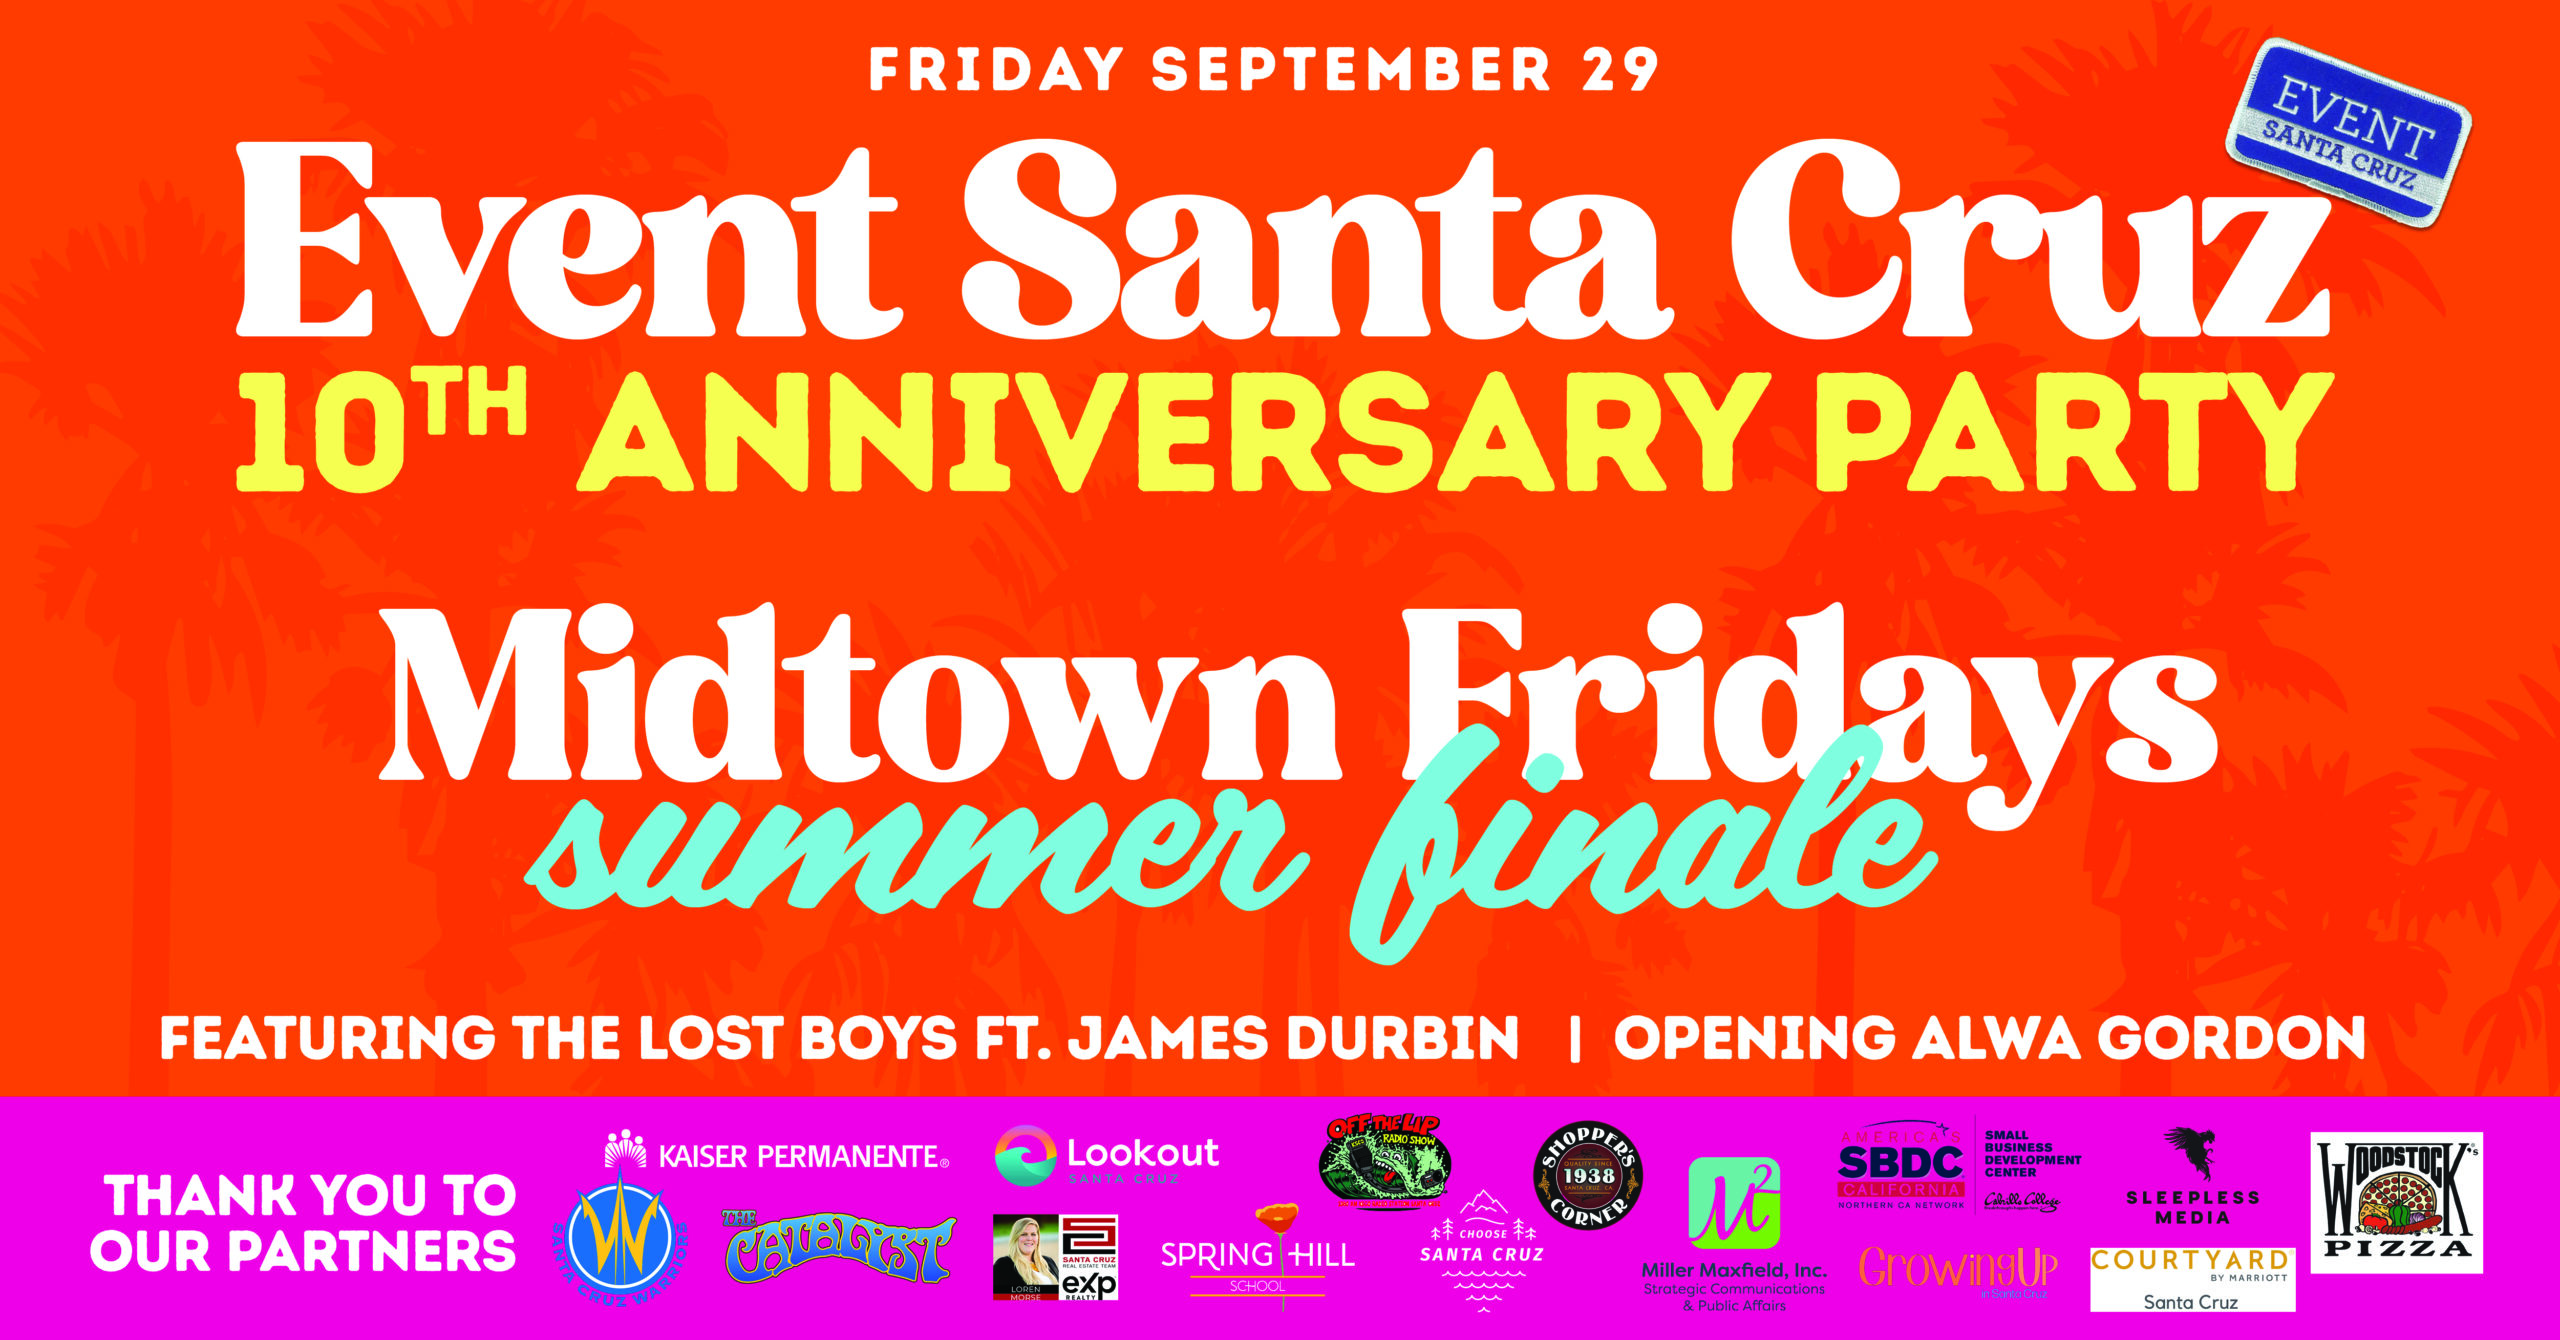 The Event Santa Cruz 10 Year Anniversary Party / Midtown Fridays Finale